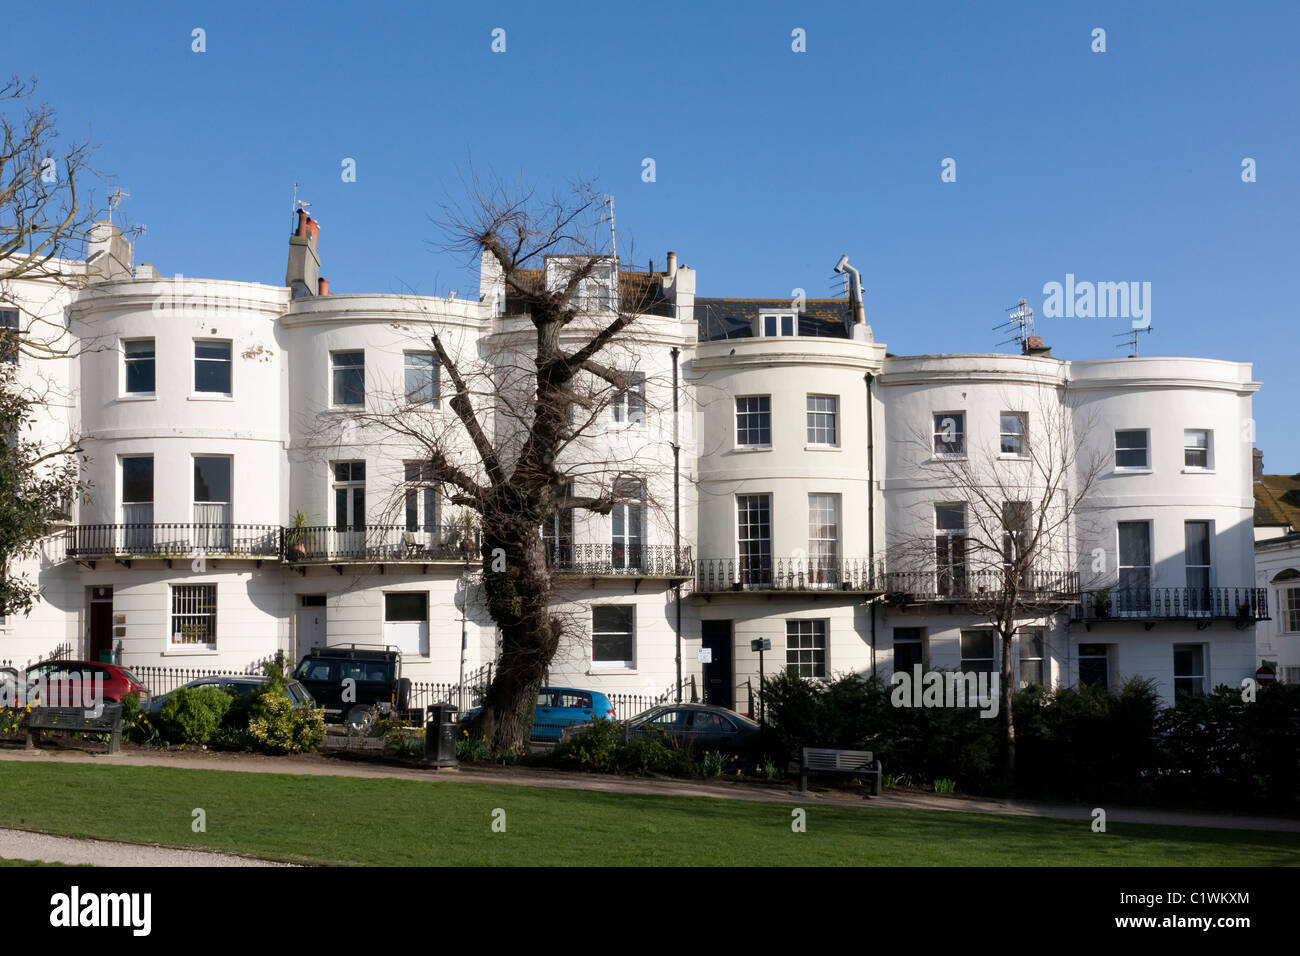 Bow fronted Regency architecture in Norfolk Square, in the Brunswick district of Brighton and Hove Stock Photo